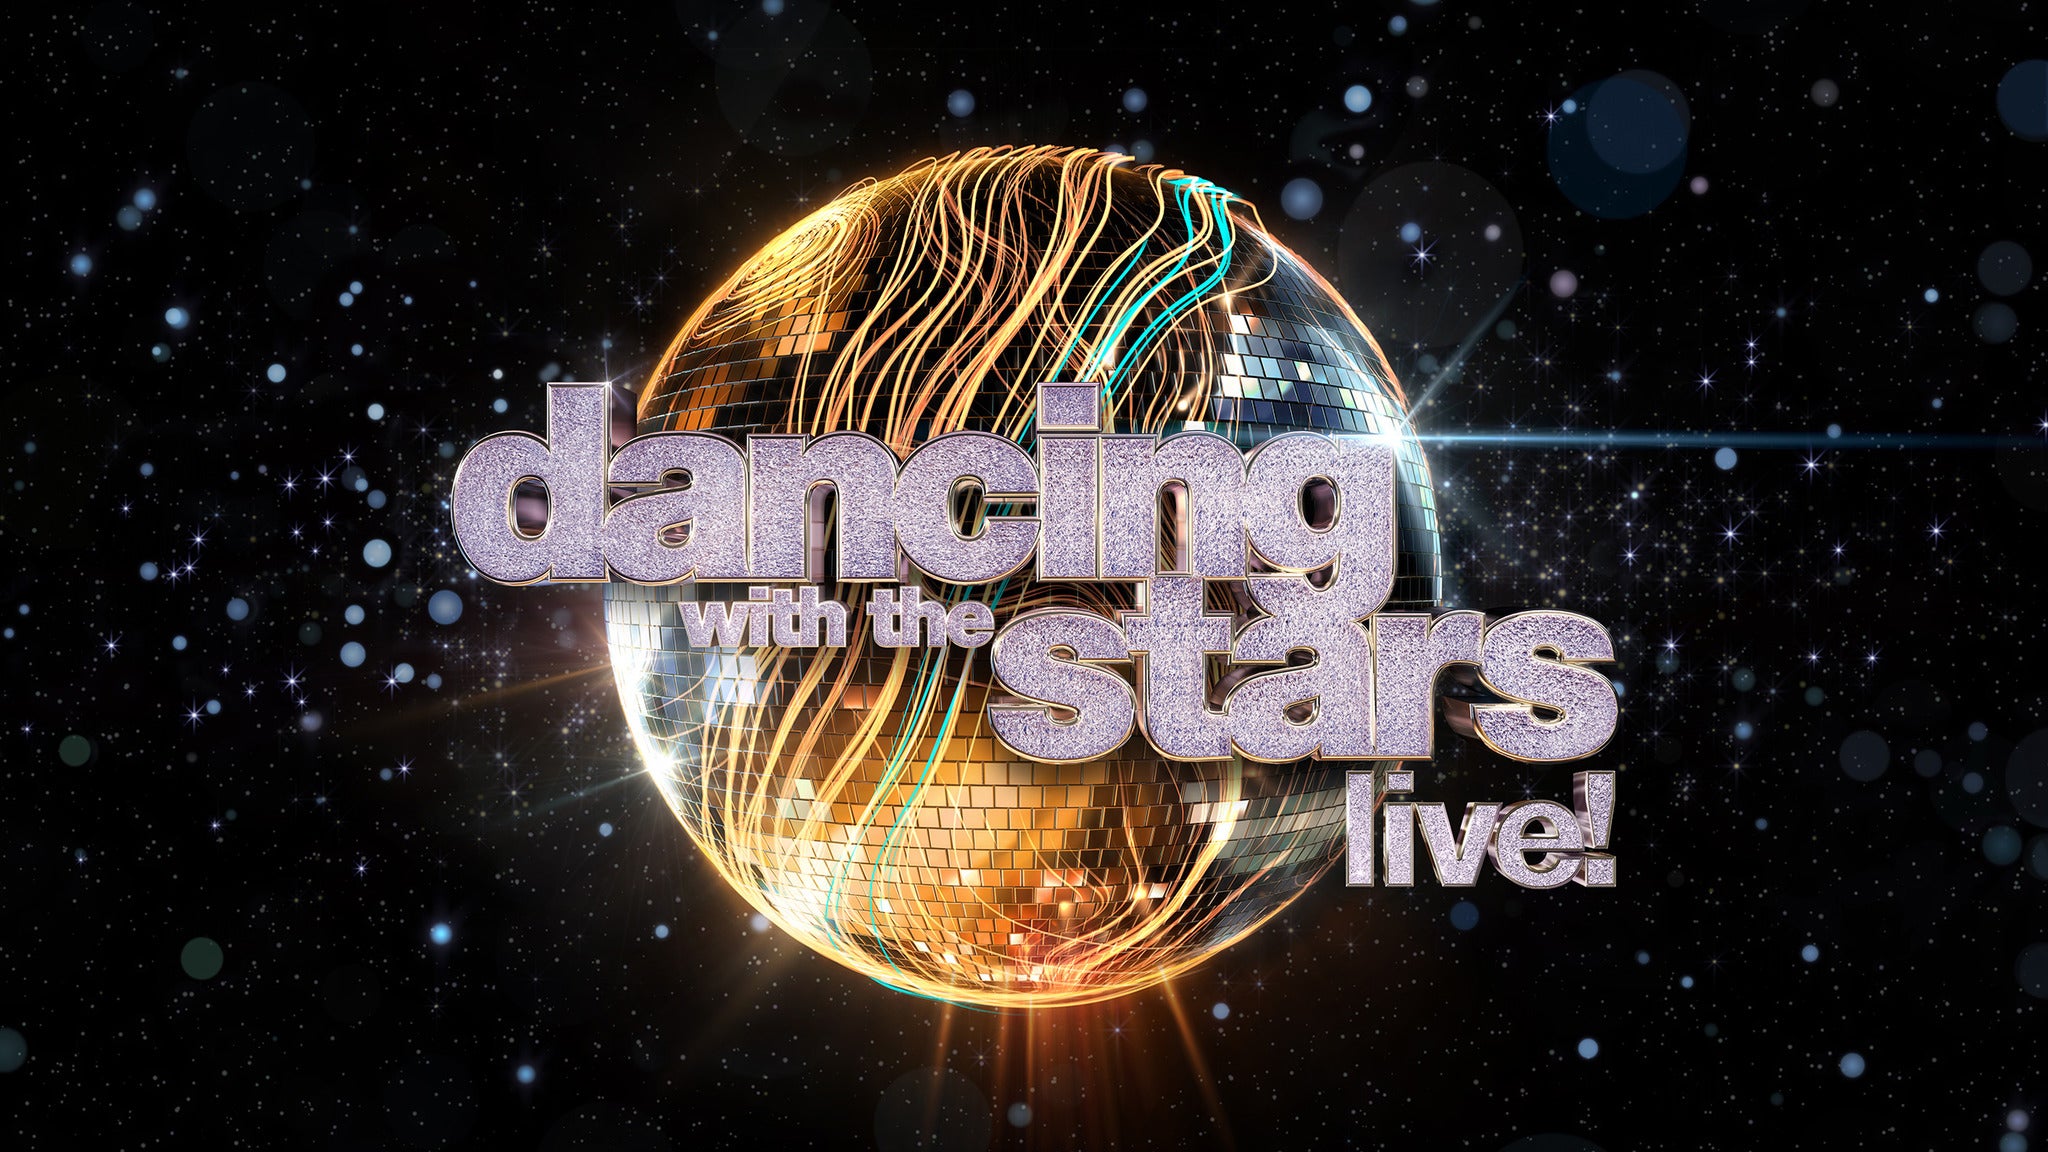 Dancing With The Stars: Live! - Light Up The Night in New Brunswick promo photo for American Express presale offer code